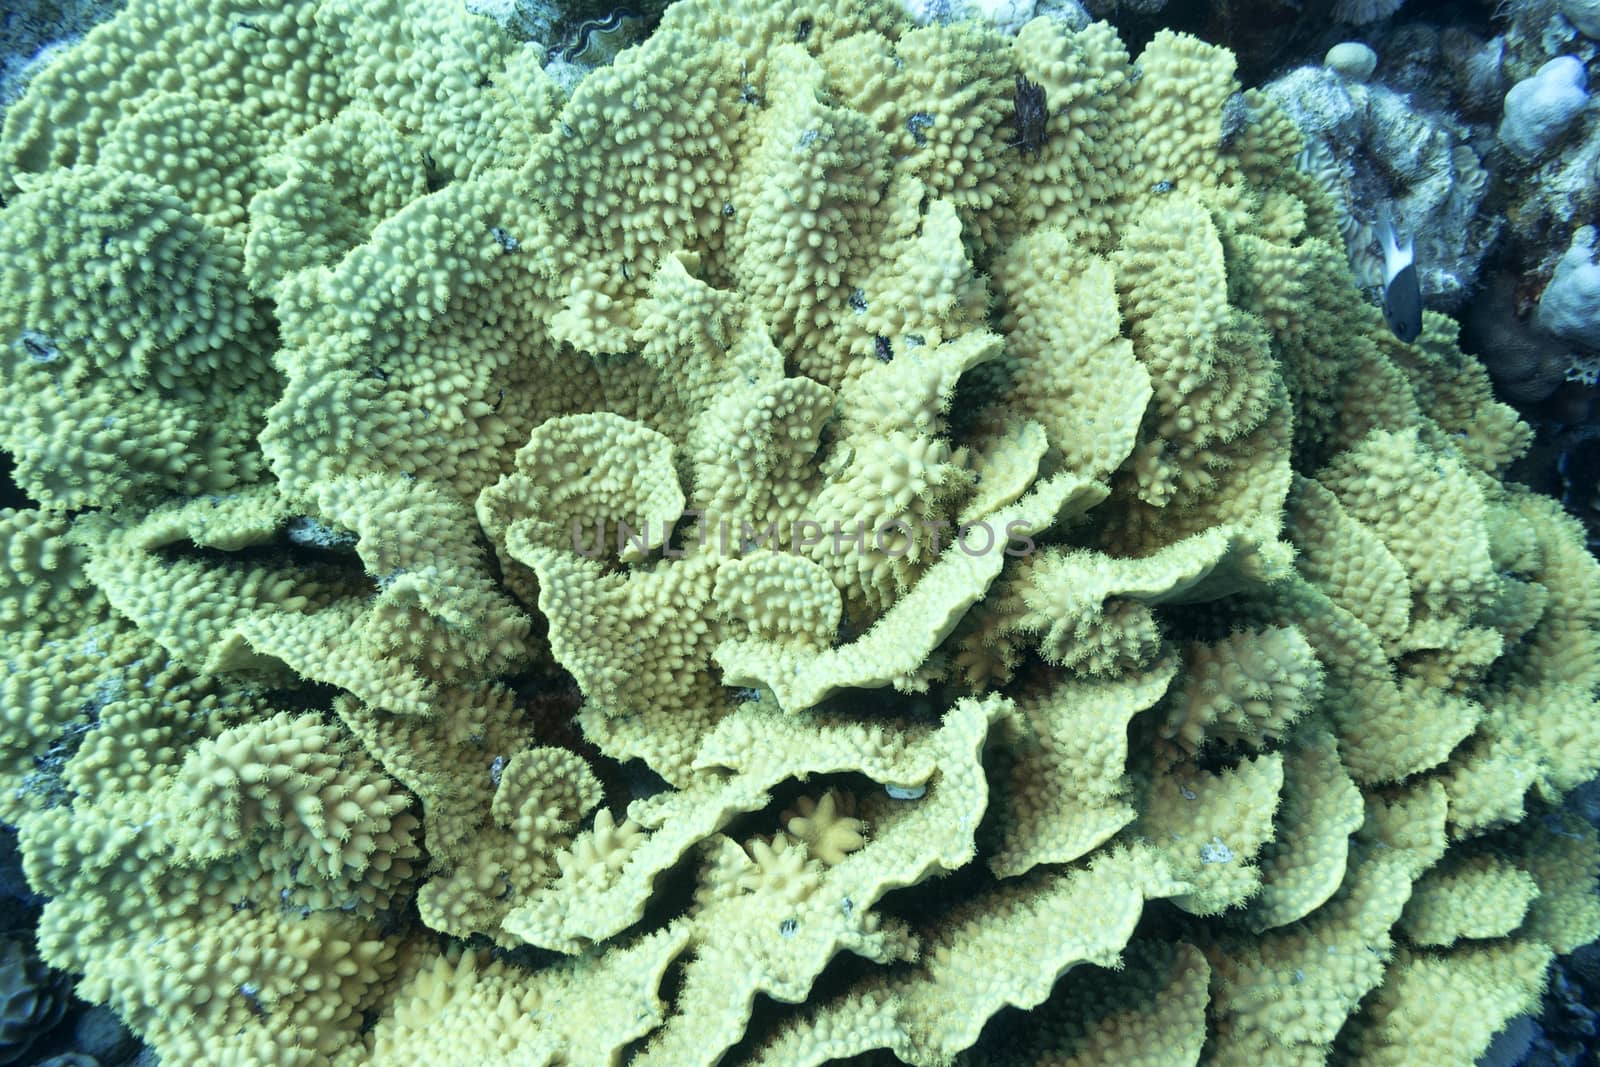 coral reef with yellow coral turbinaria mesenterina at the bottom of tropical sea